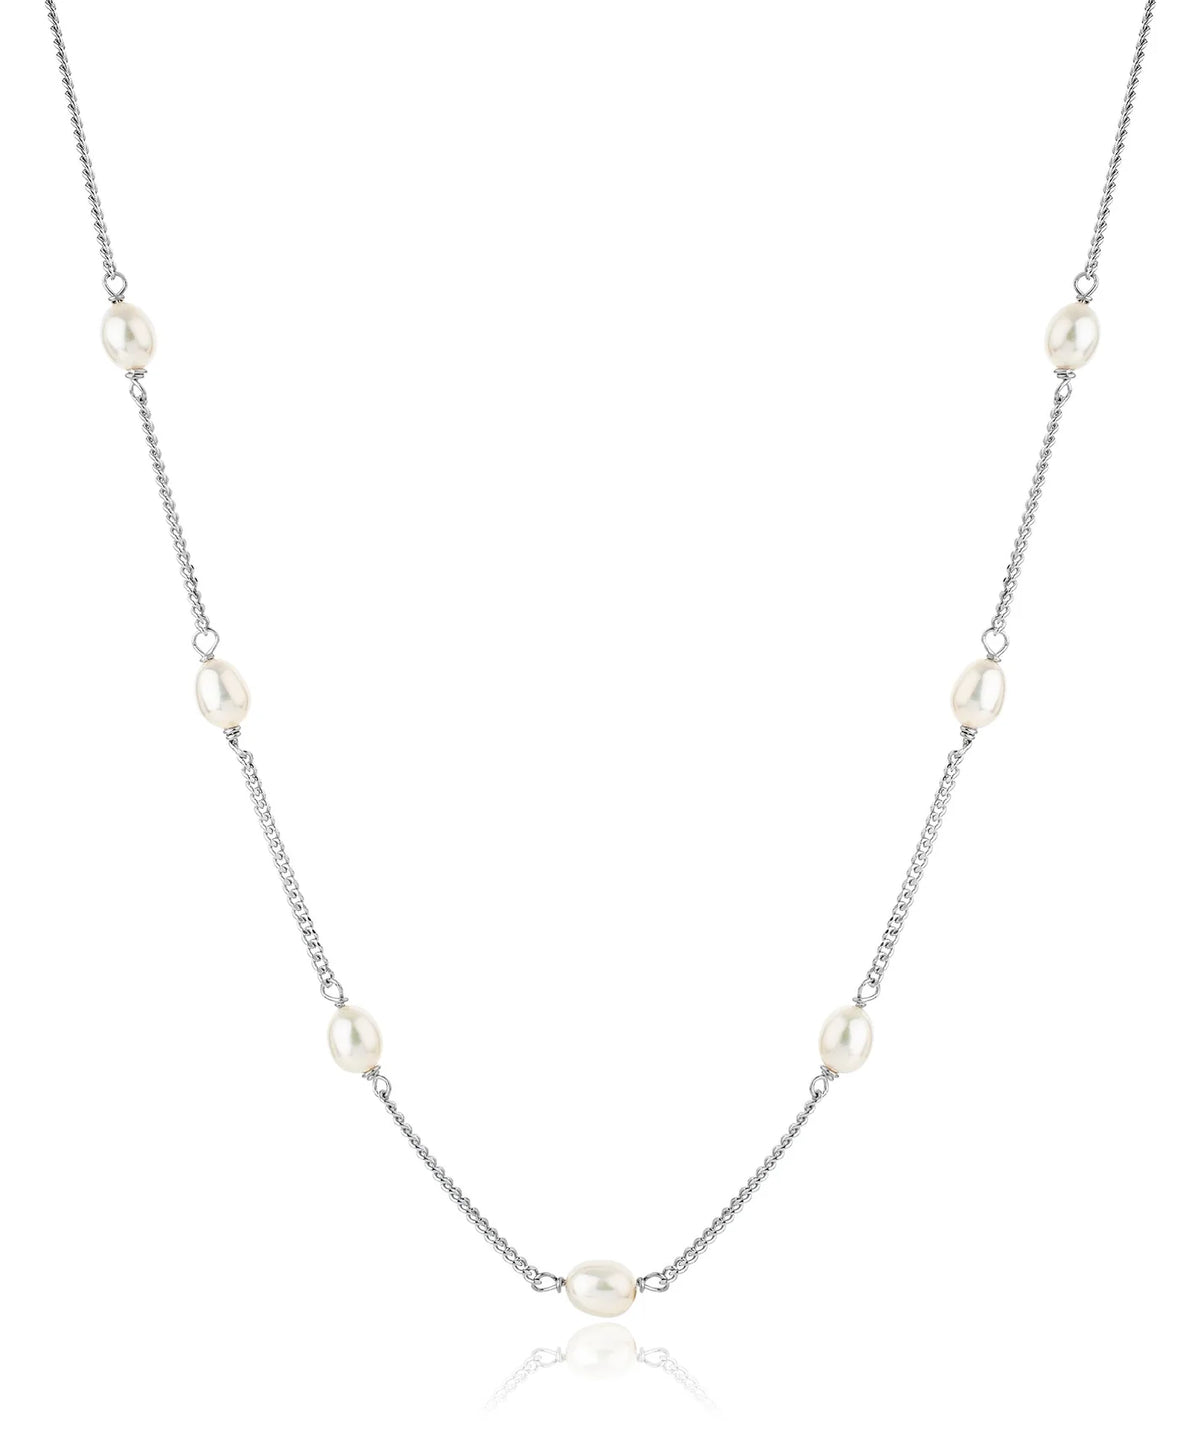 Silver chain necklace with 7 fresh water pearls